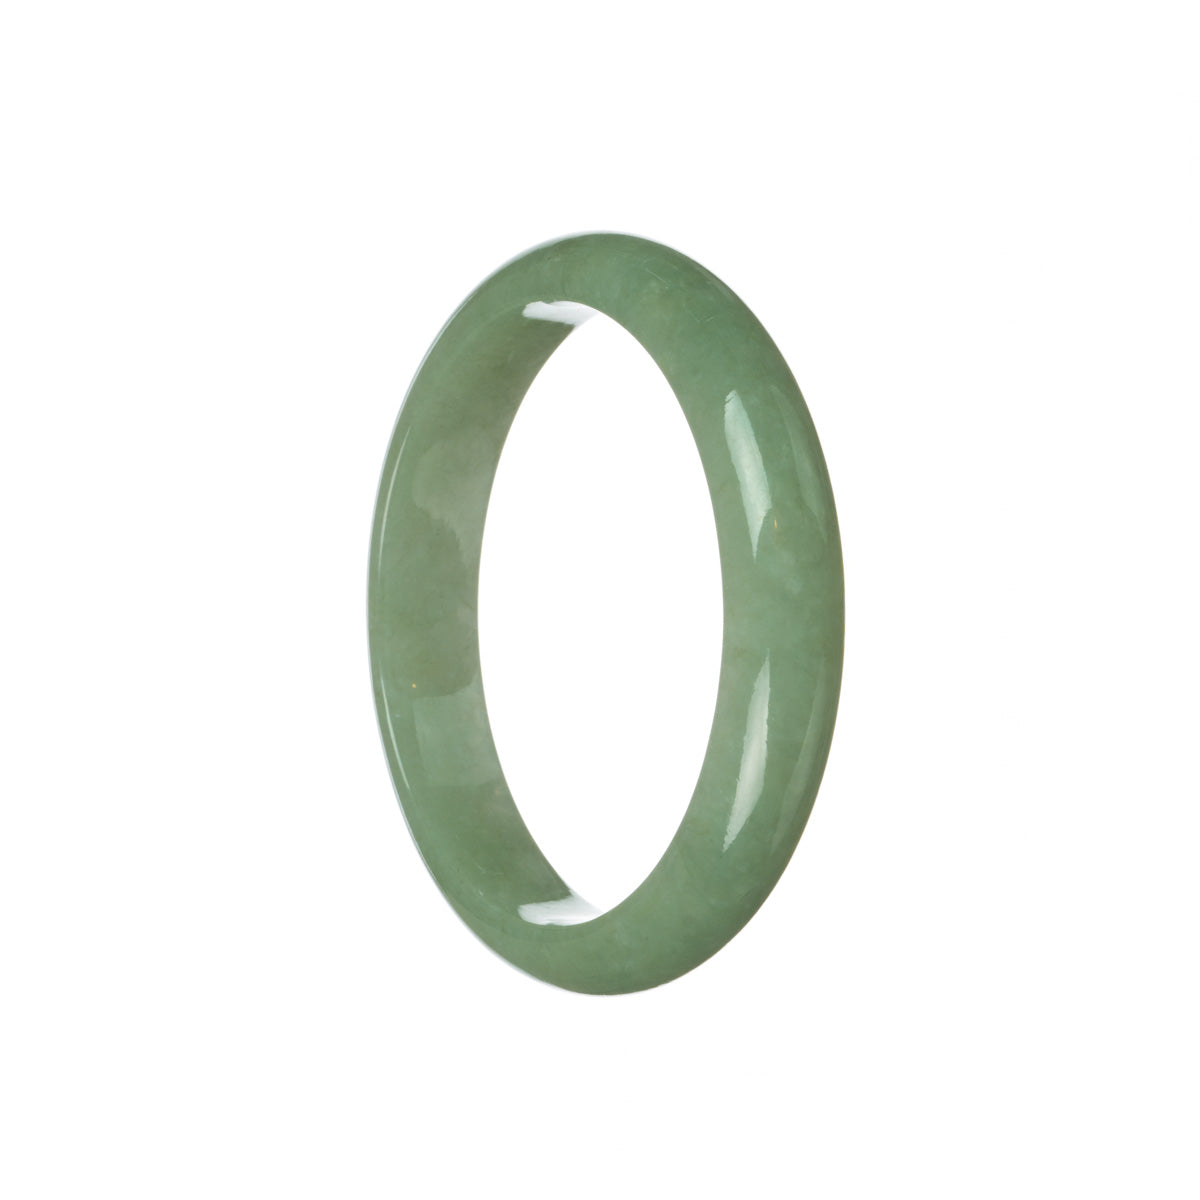 A close-up photo of an elegant green jadeite bracelet. The bracelet features a half-moon shape and is 59mm in size. The vibrant green color of the jadeite is beautifully showcased, highlighting its authenticity and high grade. Perfect for adding a touch of sophistication to any outfit.